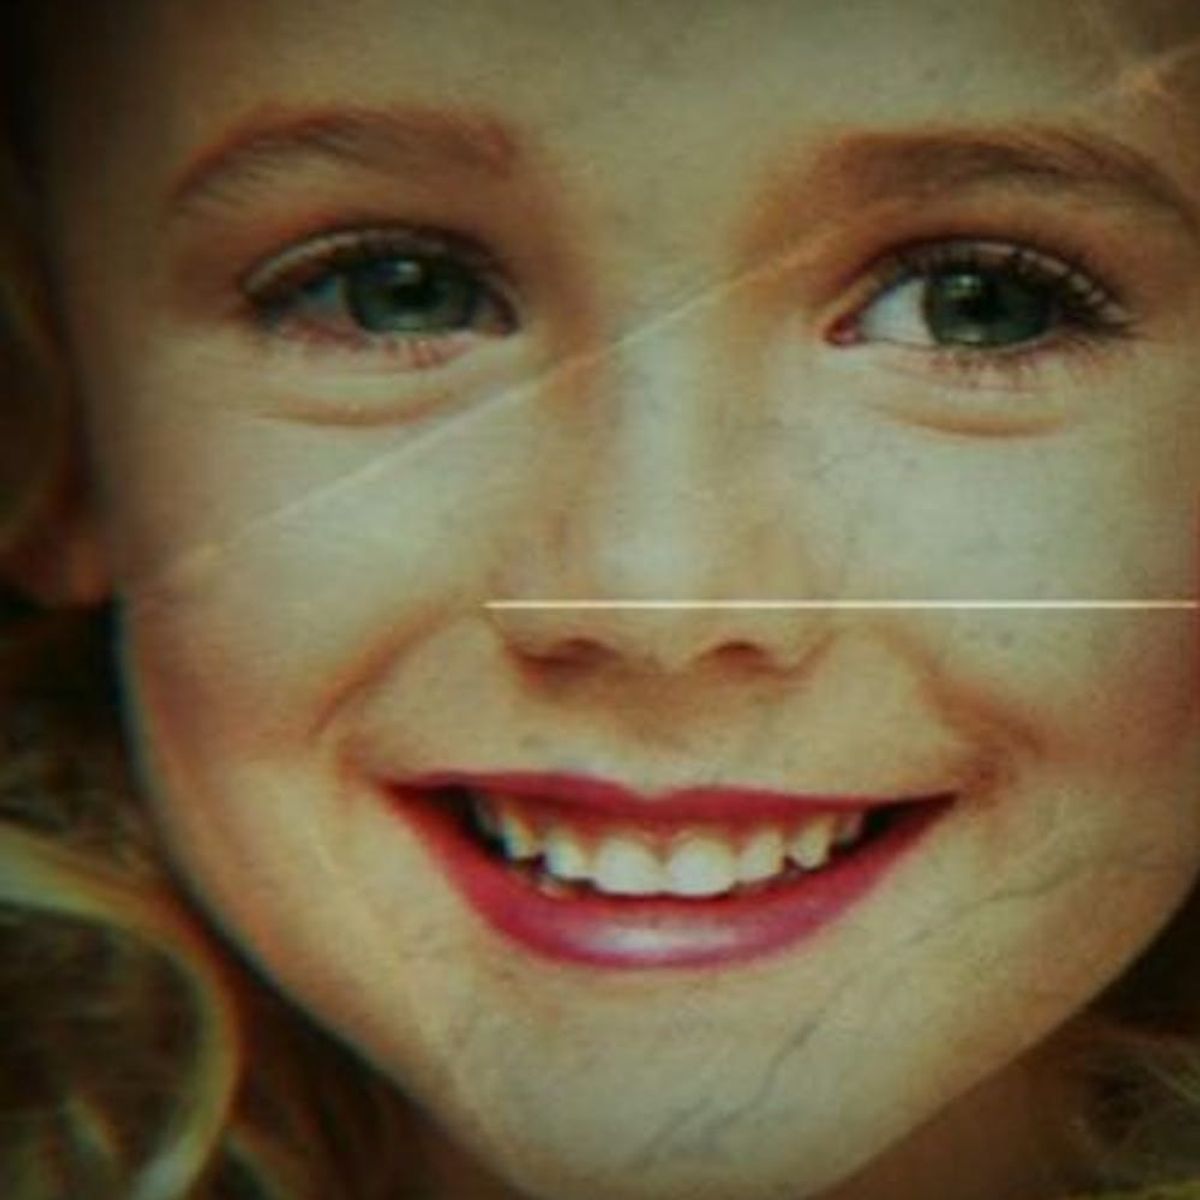 The Trailer for The Case of JonBenét Ramsey Will Give You Chills